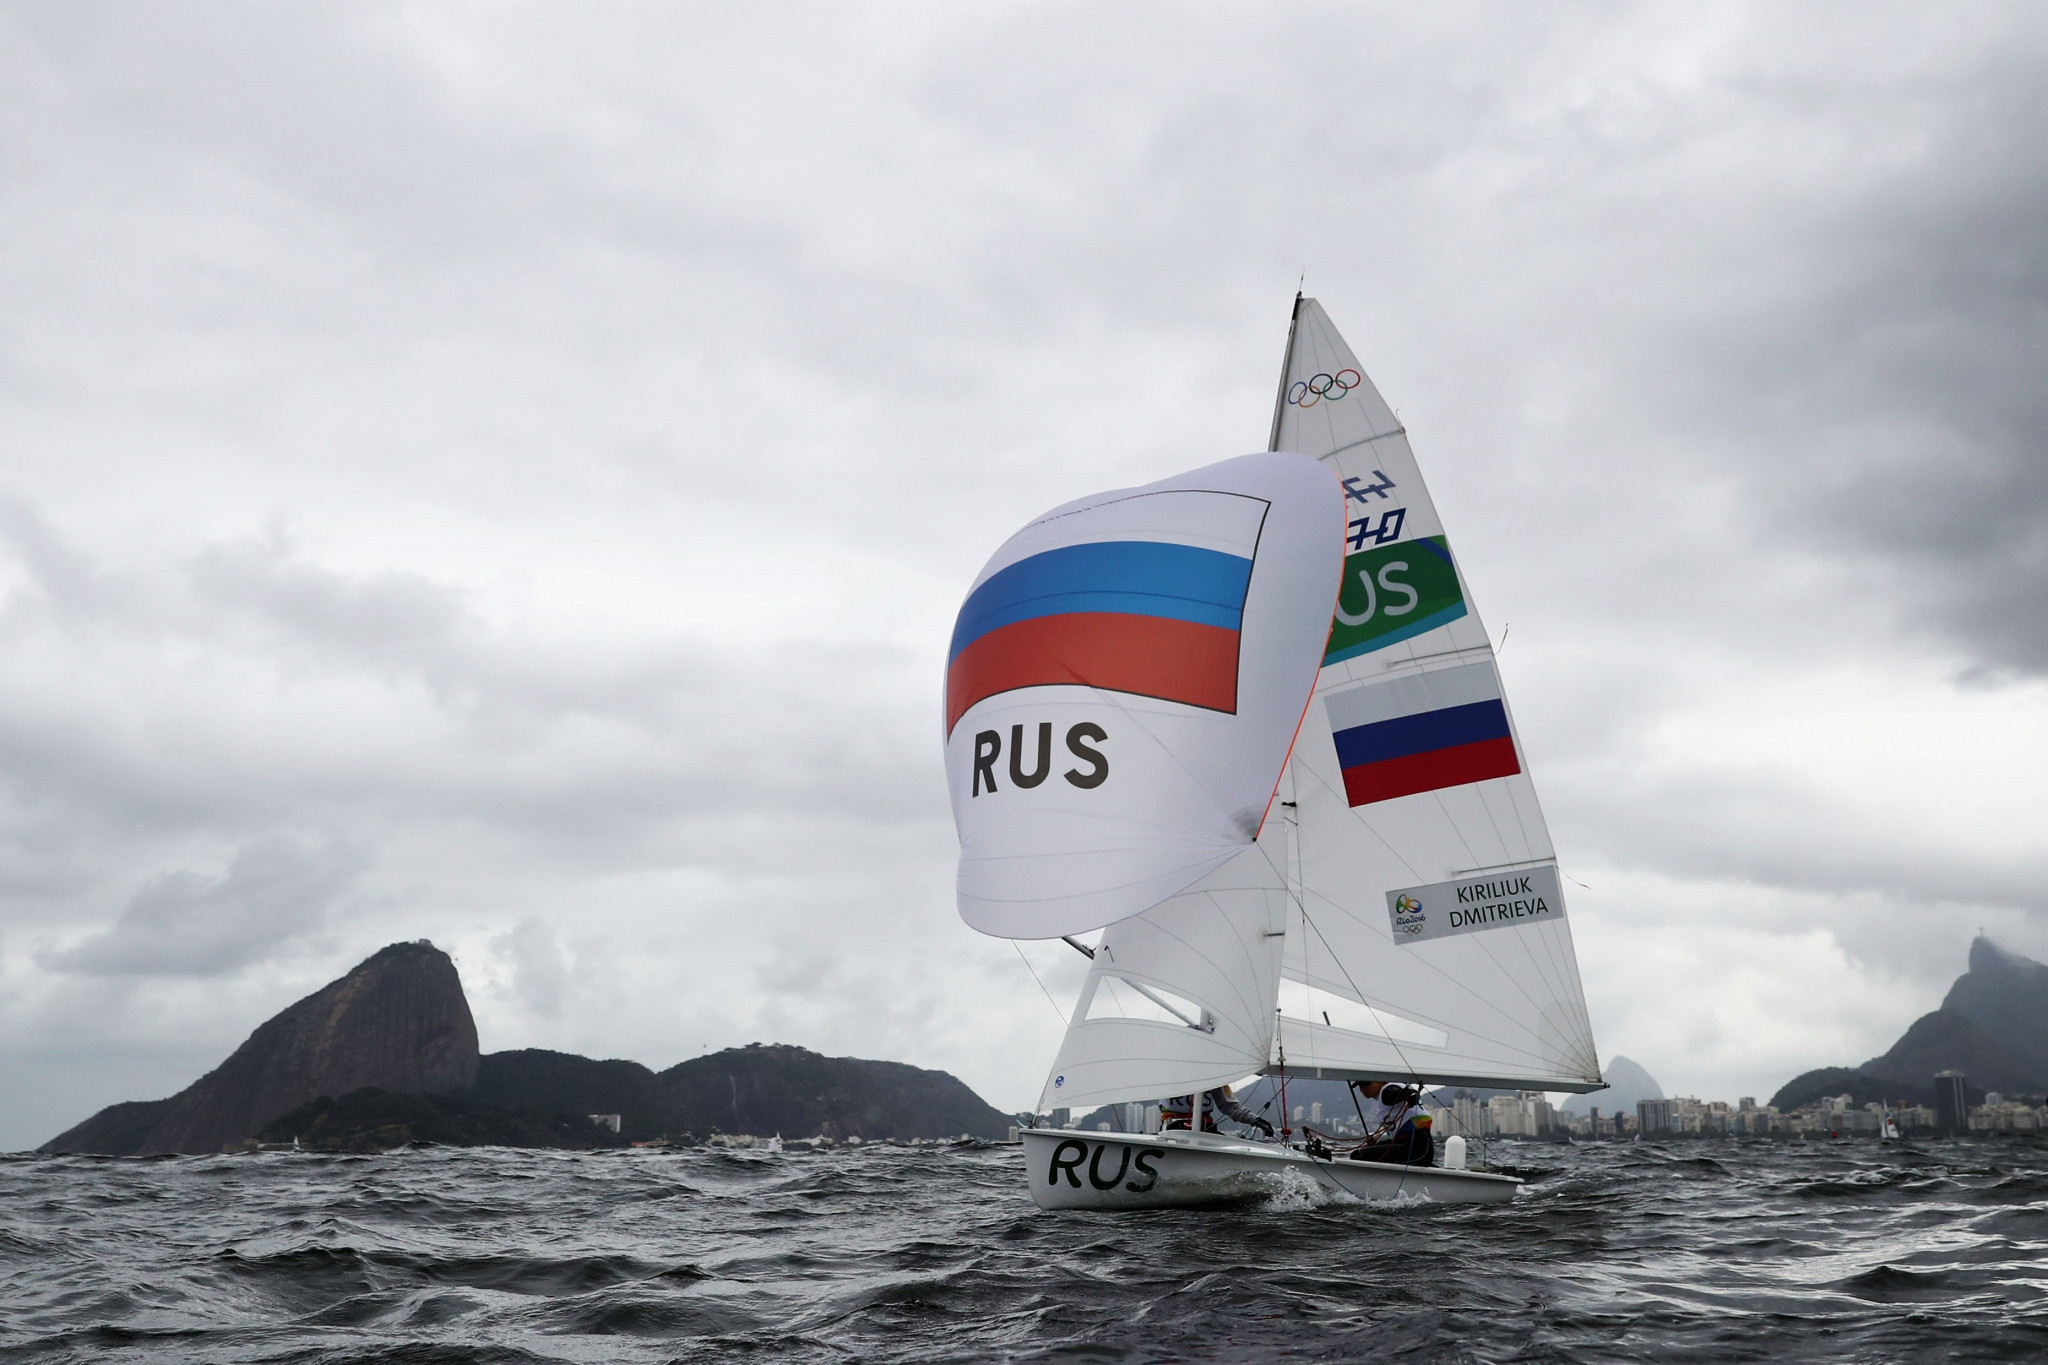 World Sailing has intentified next year's Semaine Olympique Française - the last Olympic qualifier - as the 